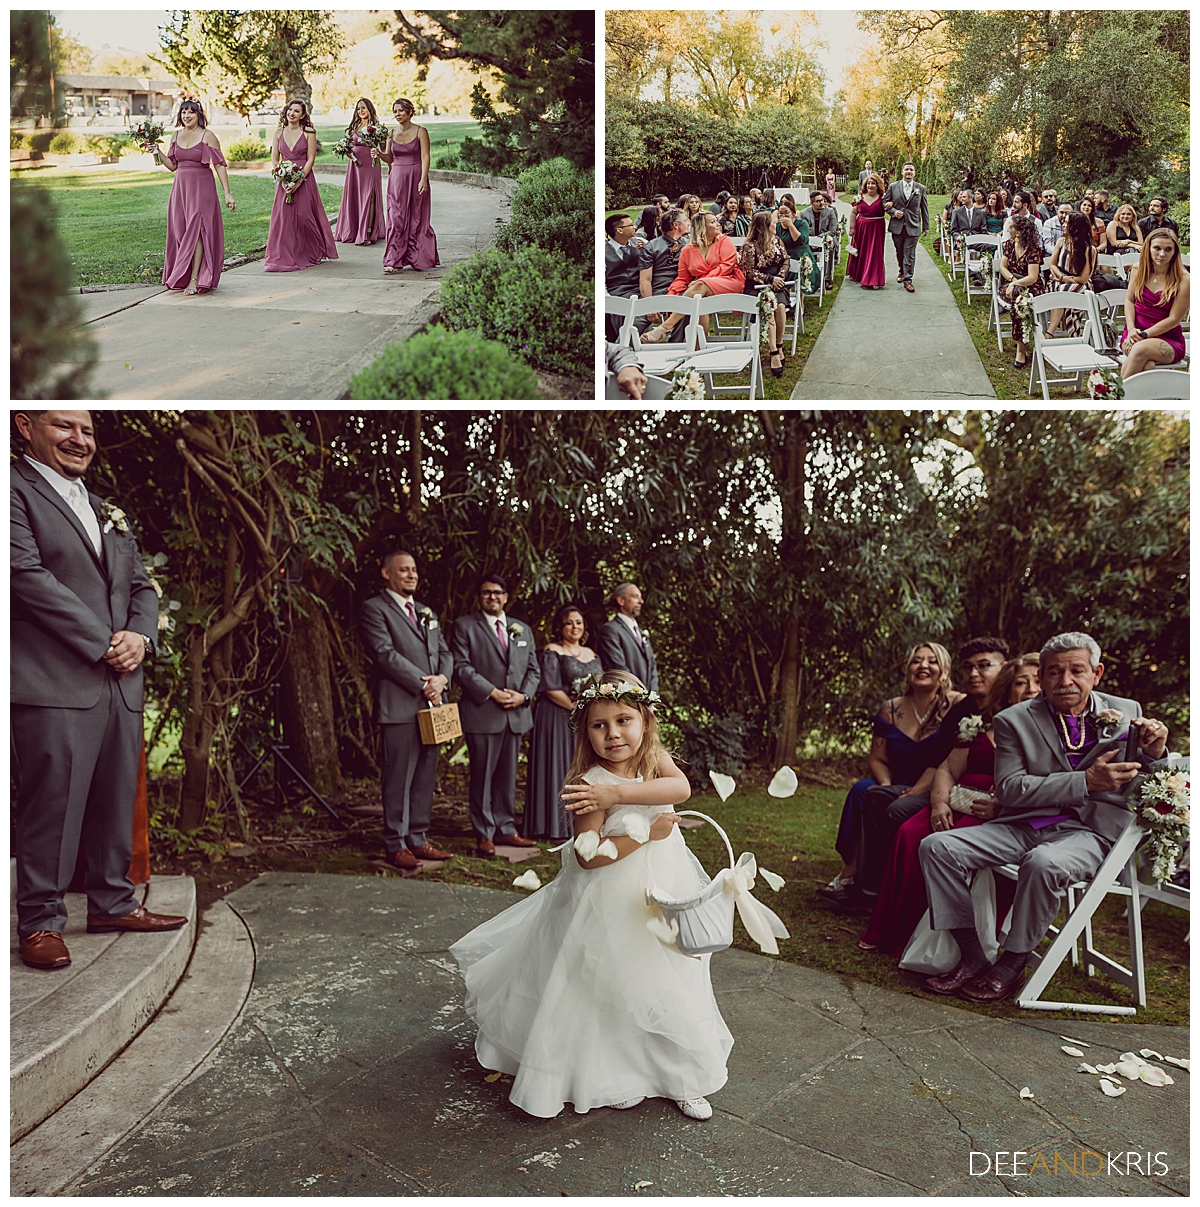 Three color images: Top left image of bridesmaids walking toward aisle. Top right image of couple coming down the aisle. Bottom image of flower girl tossing rose petals.